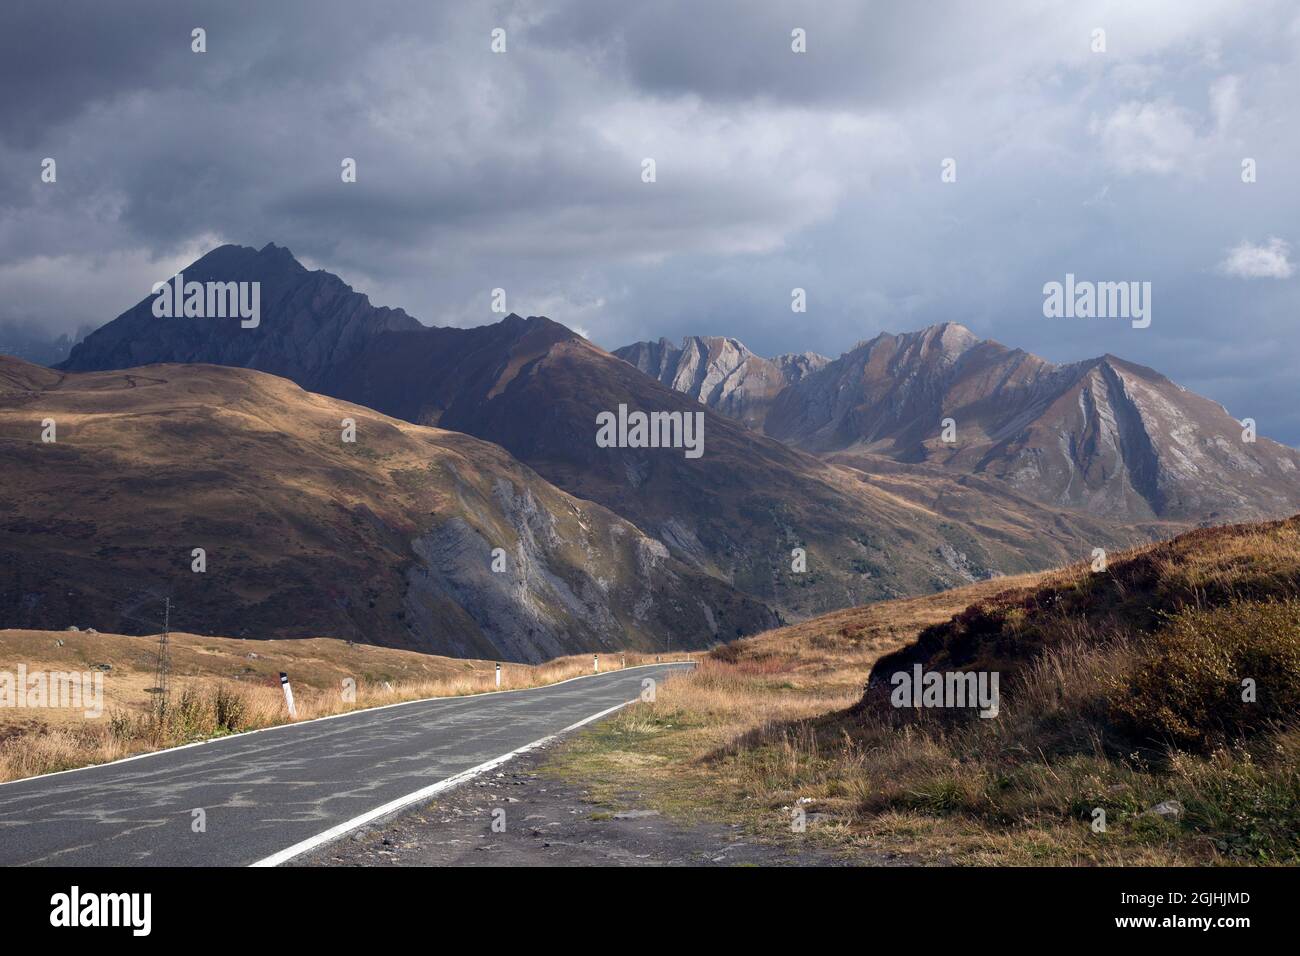 Mountain route over Val D'Isere, Alps, France Stock Photo